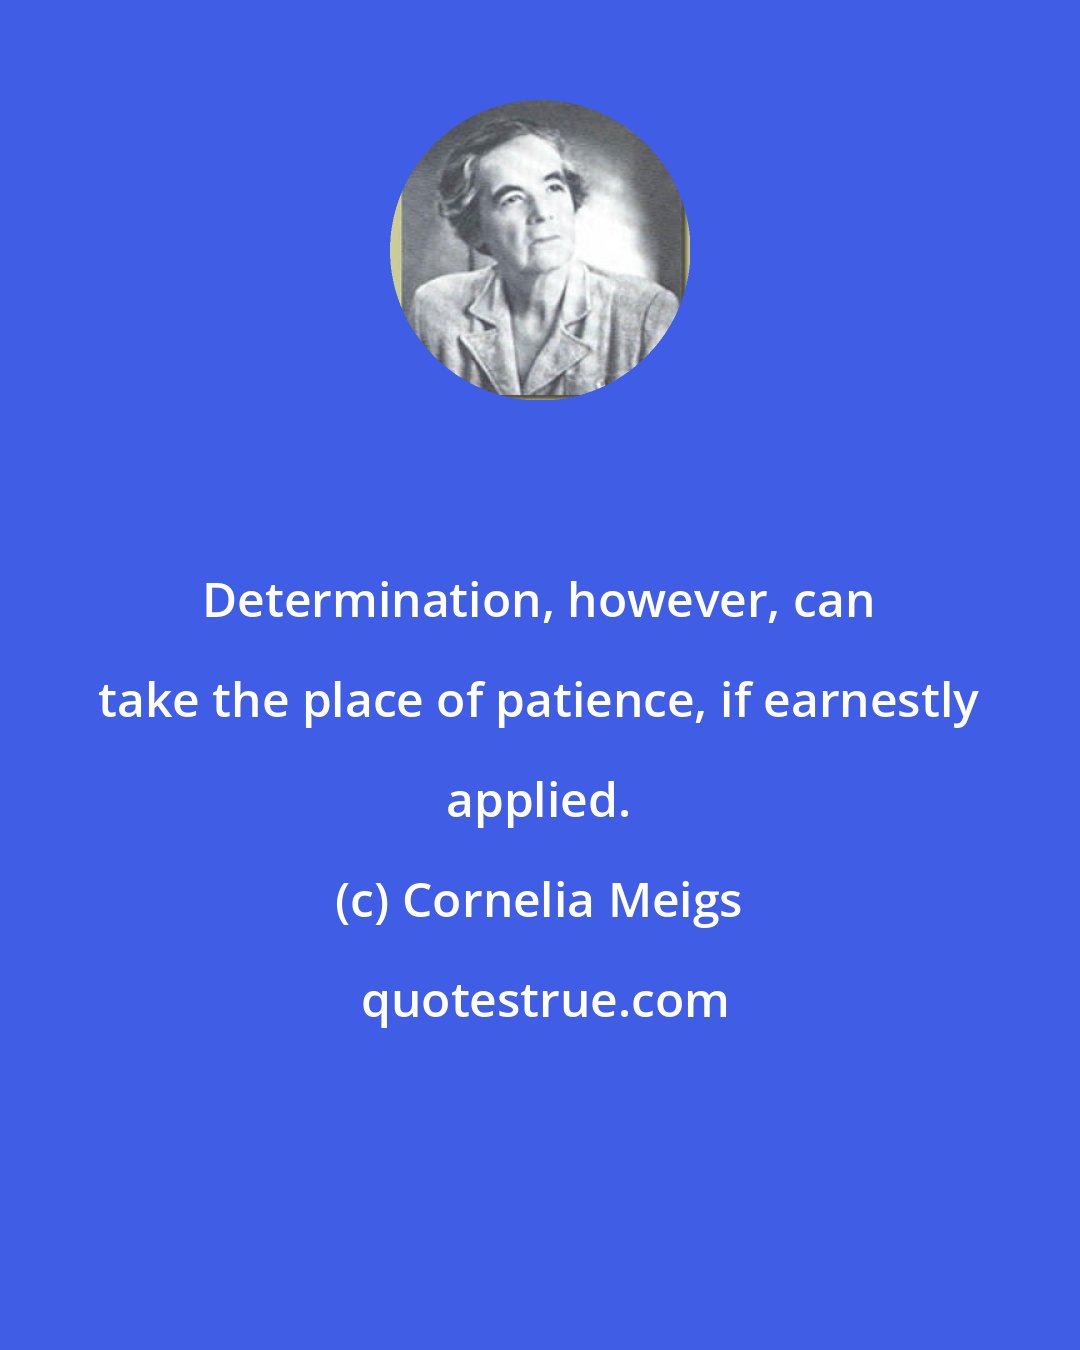 Cornelia Meigs: Determination, however, can take the place of patience, if earnestly applied.